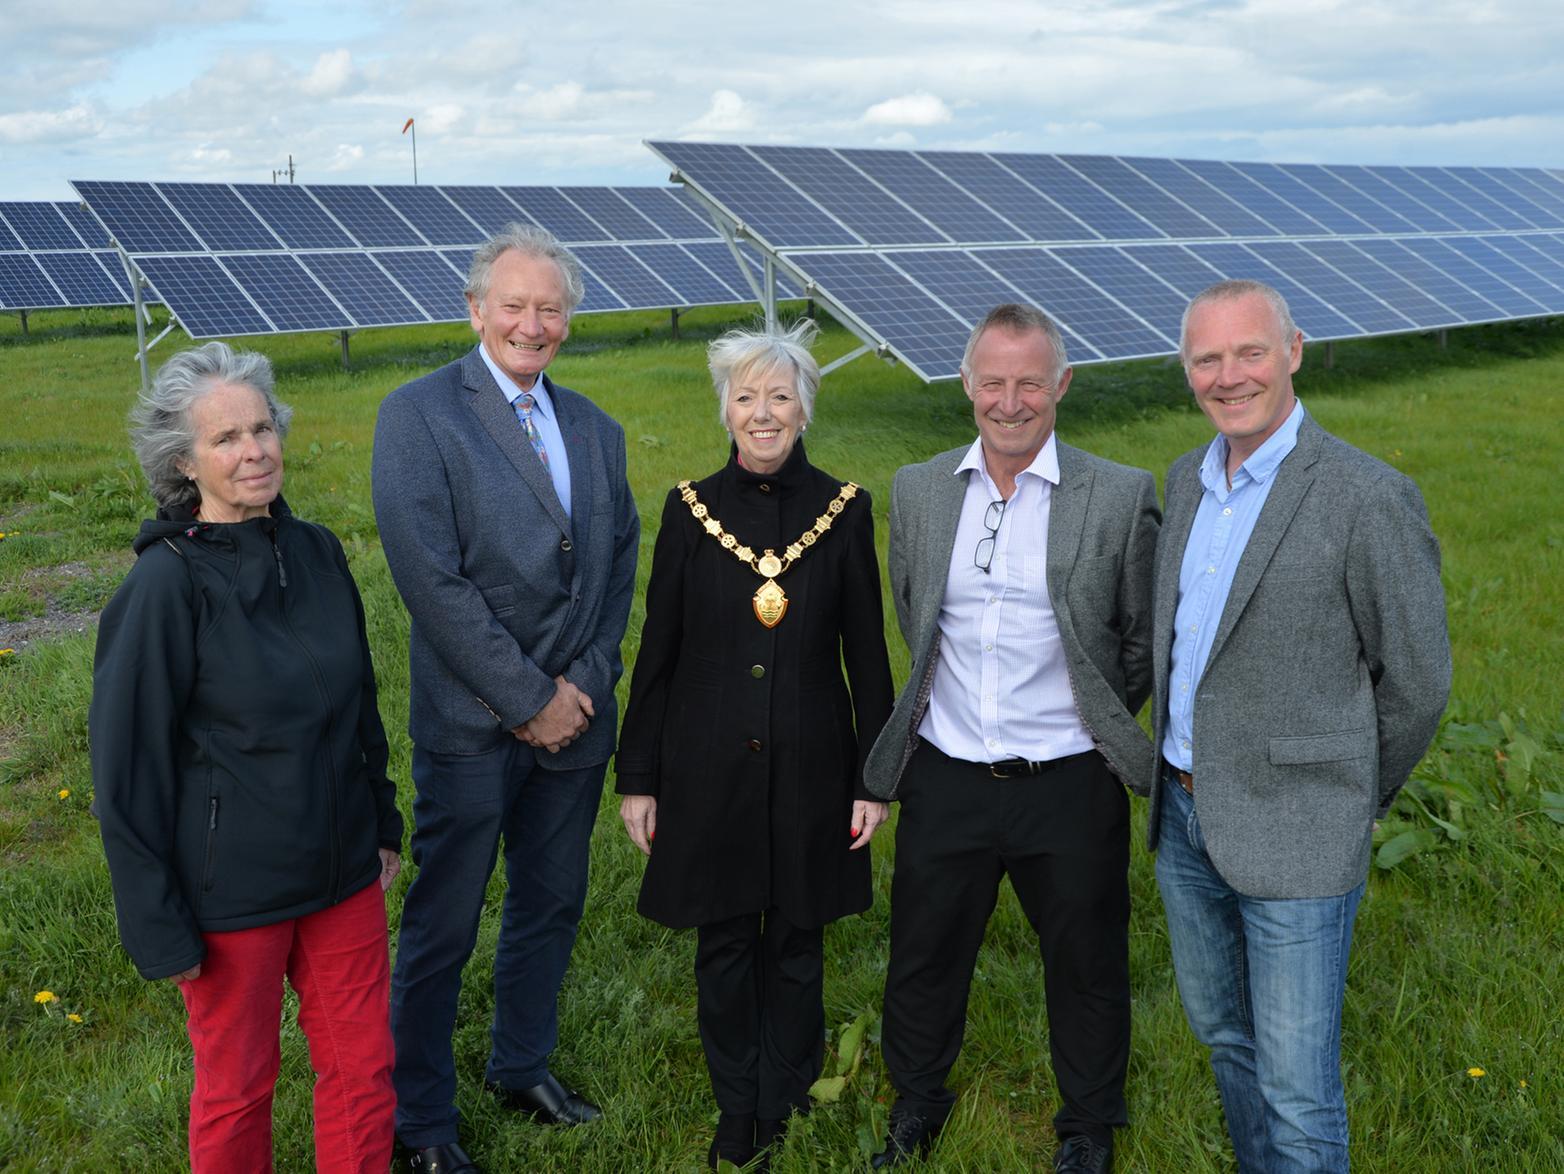 Harborough Energy announced the official opening of a renewable solar photo-voltaic energy project  a 100 kWp array installation at NBJ Joinery premises in Husbands Bosworth.